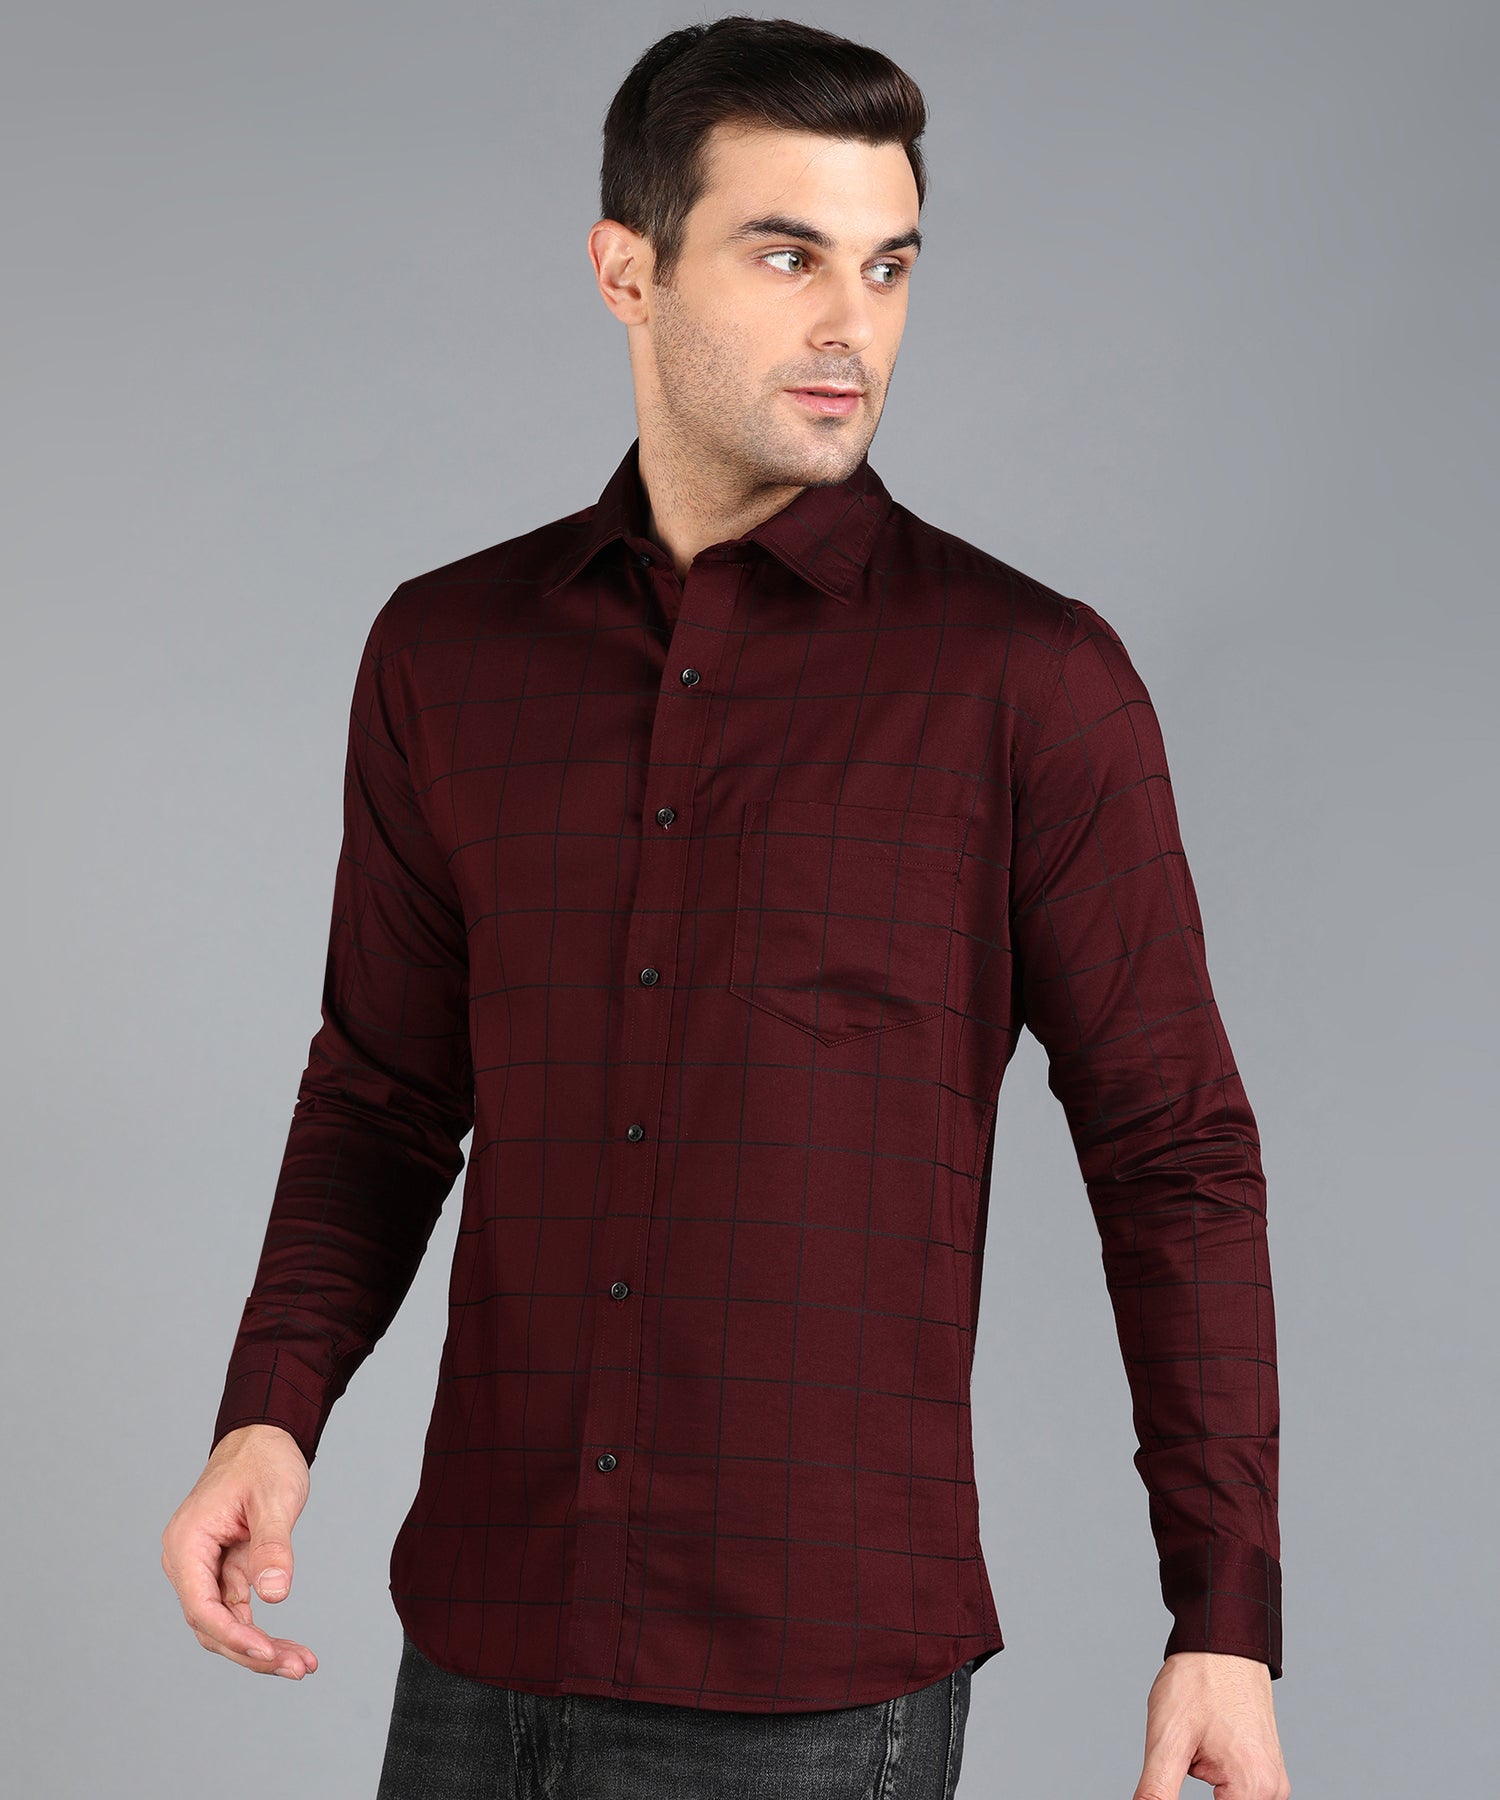 Red Checked Slim Fit Shirt